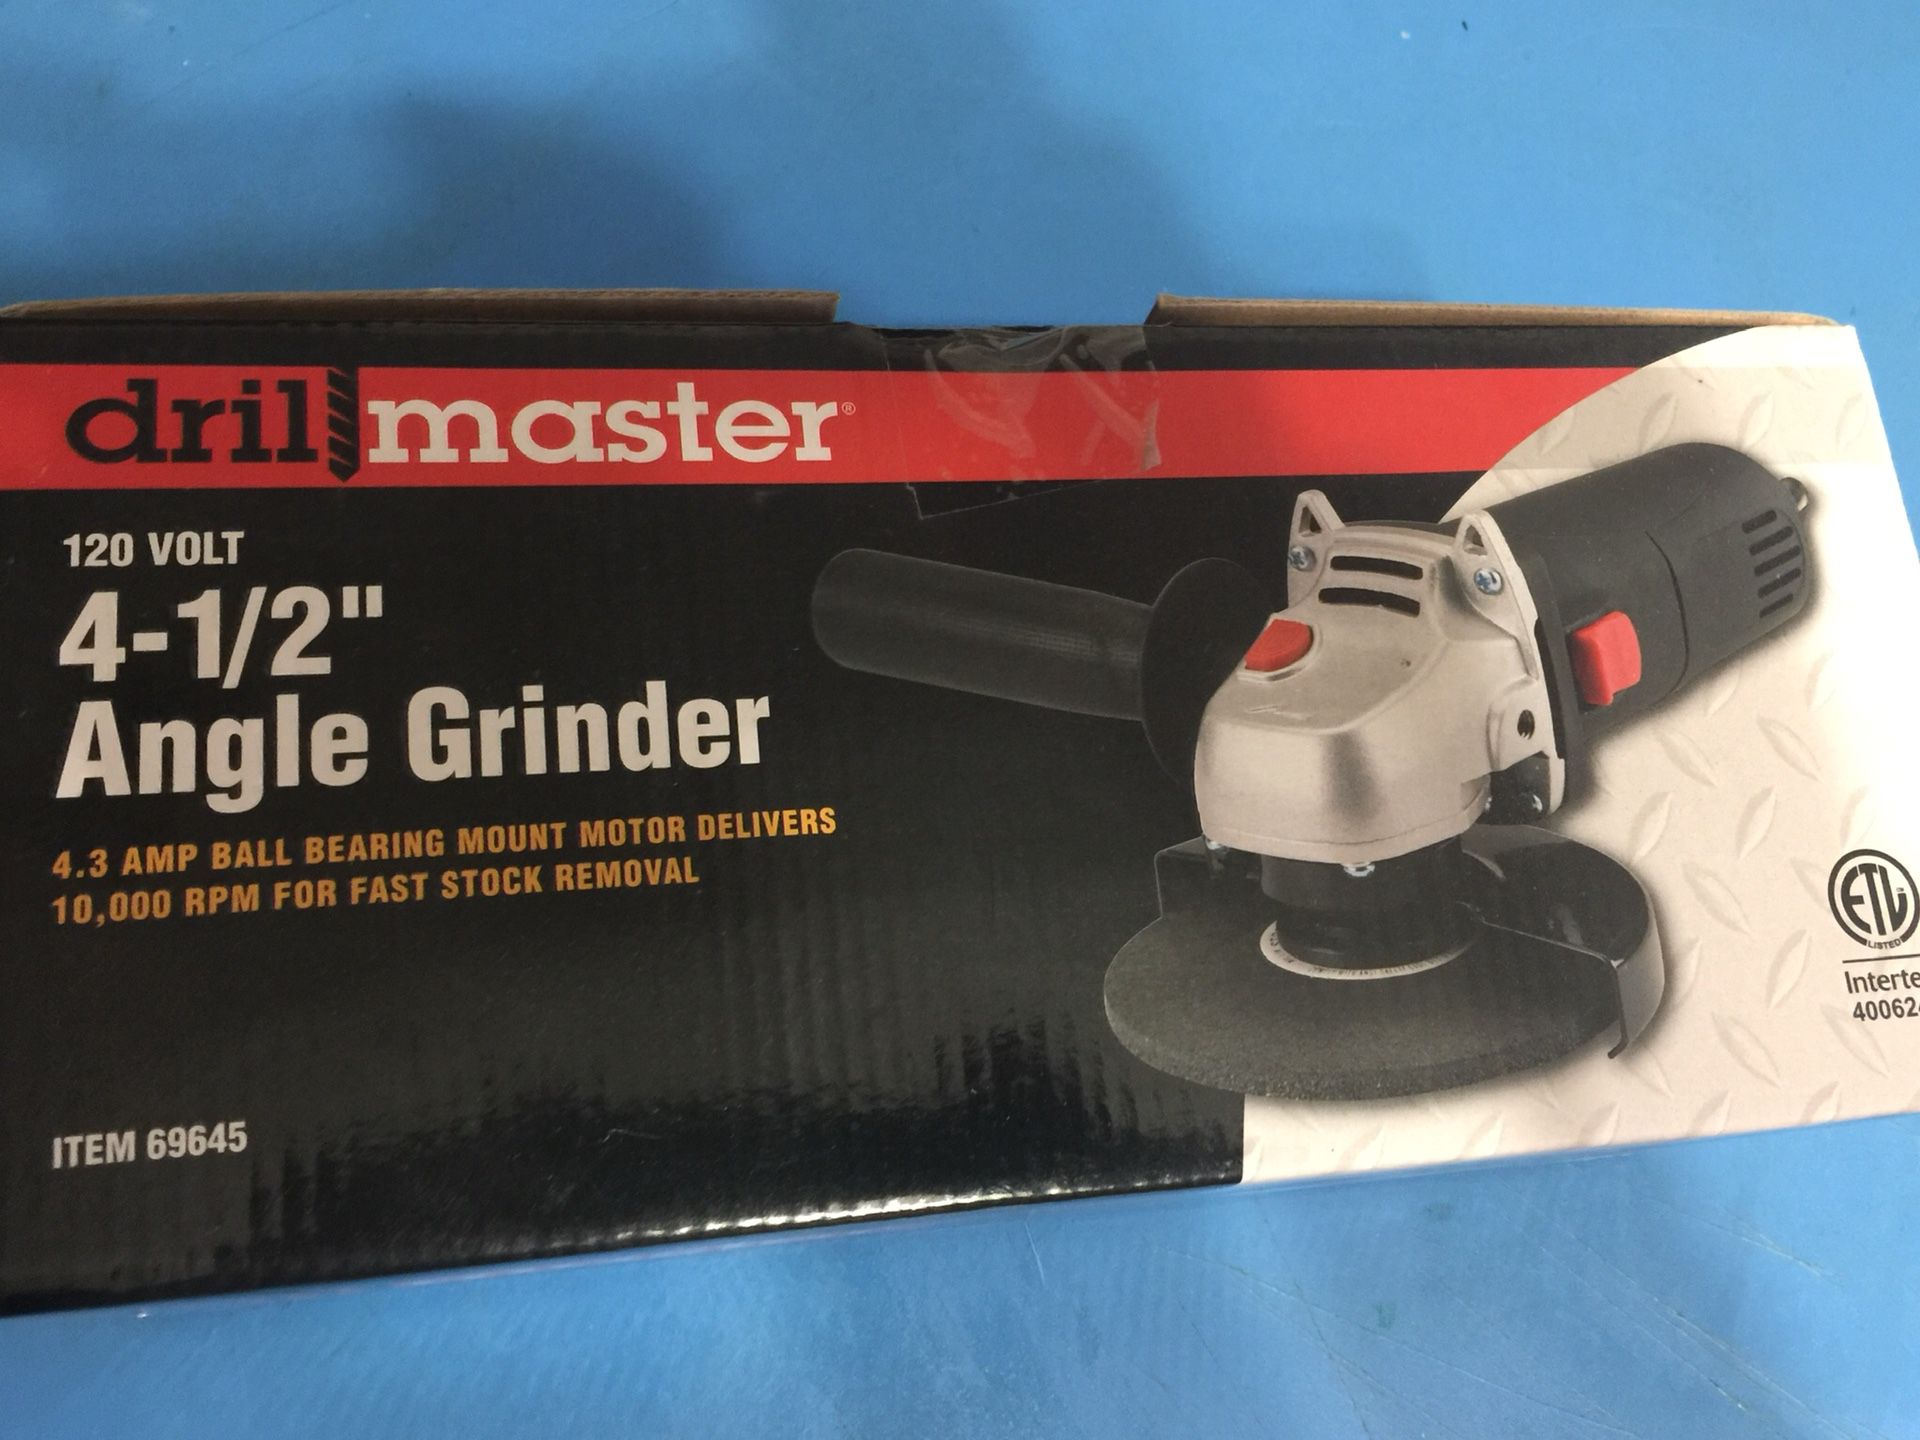 New Drill master 4 -1/2” Angle Grinder.